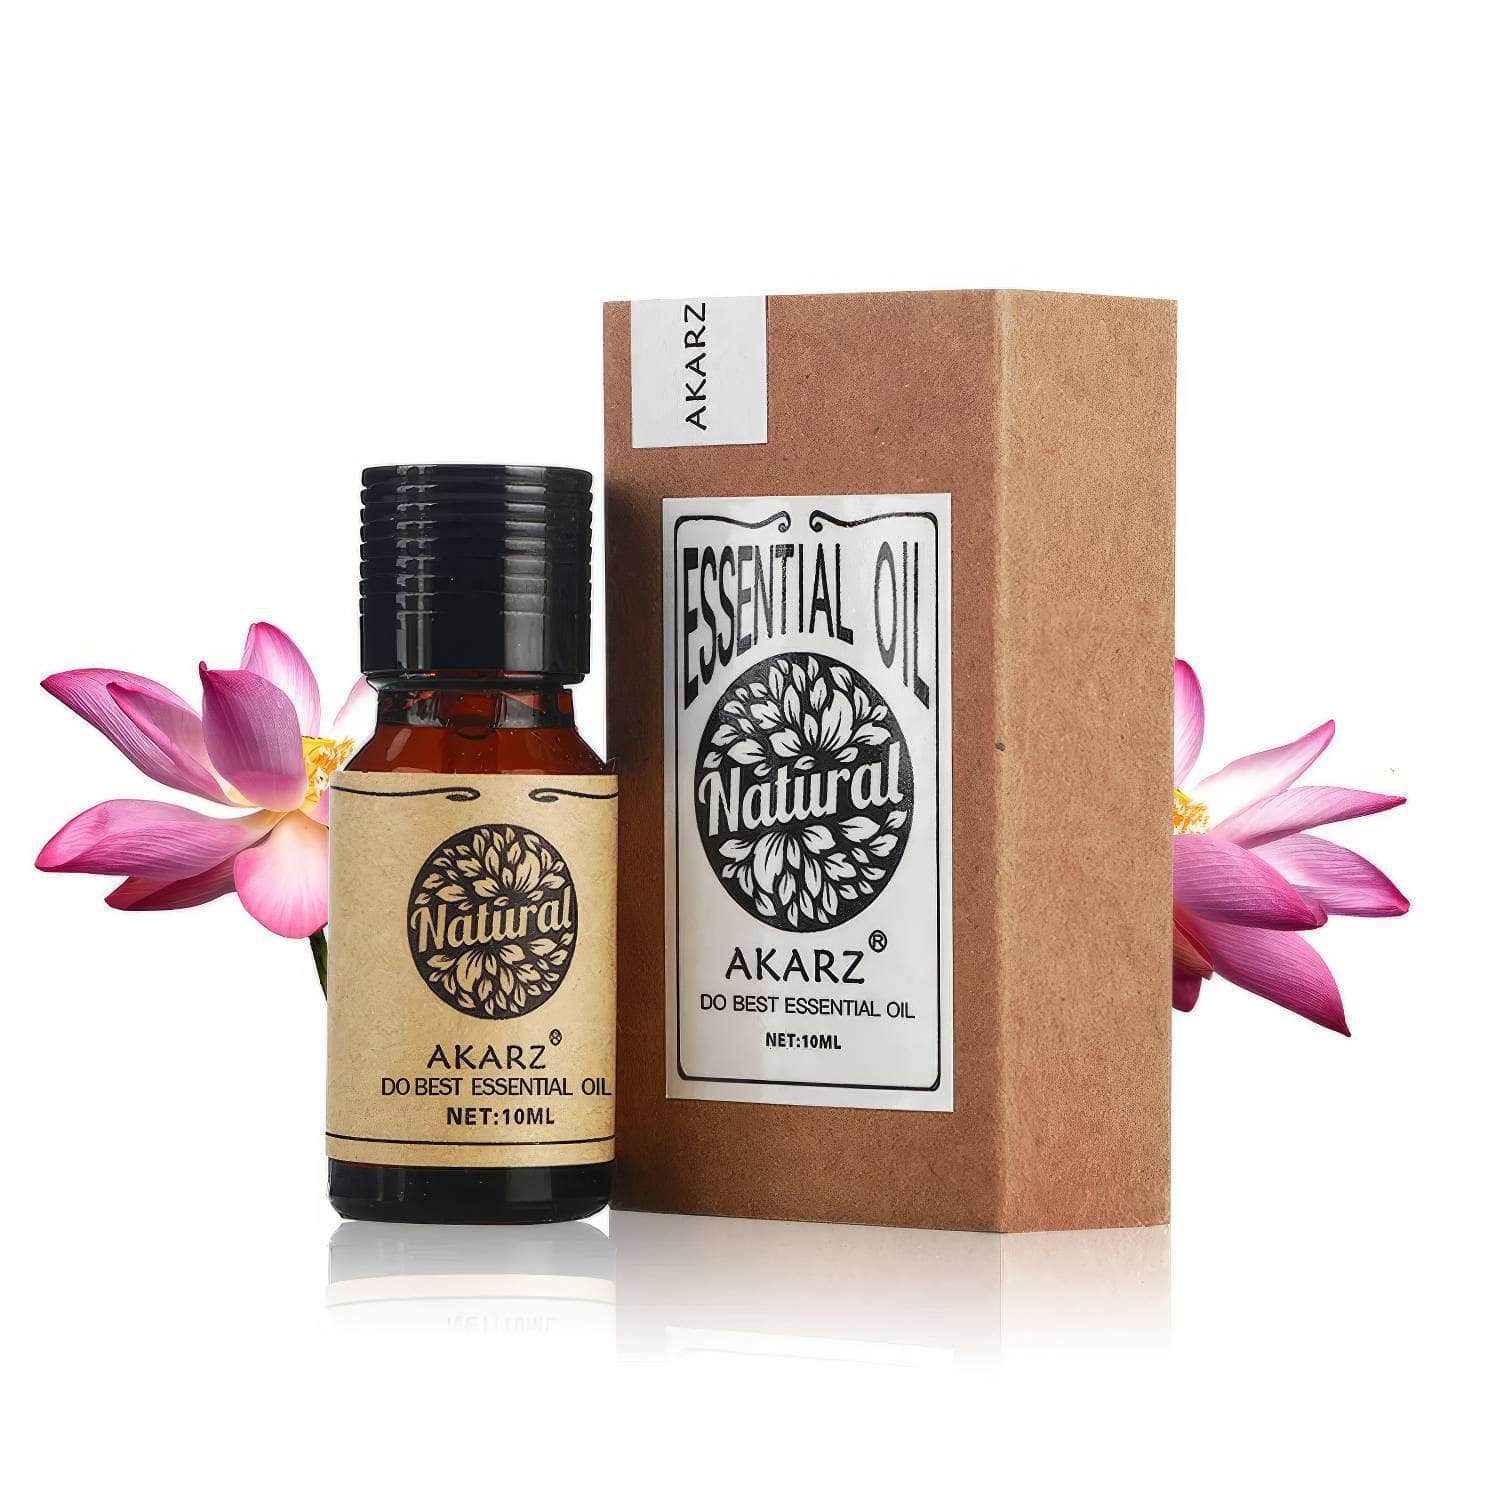 AKARZ™ Lotus Essential Oil: Aromatherapy for Delaying Senescence, Reduce Oil Secretion, Relaxation